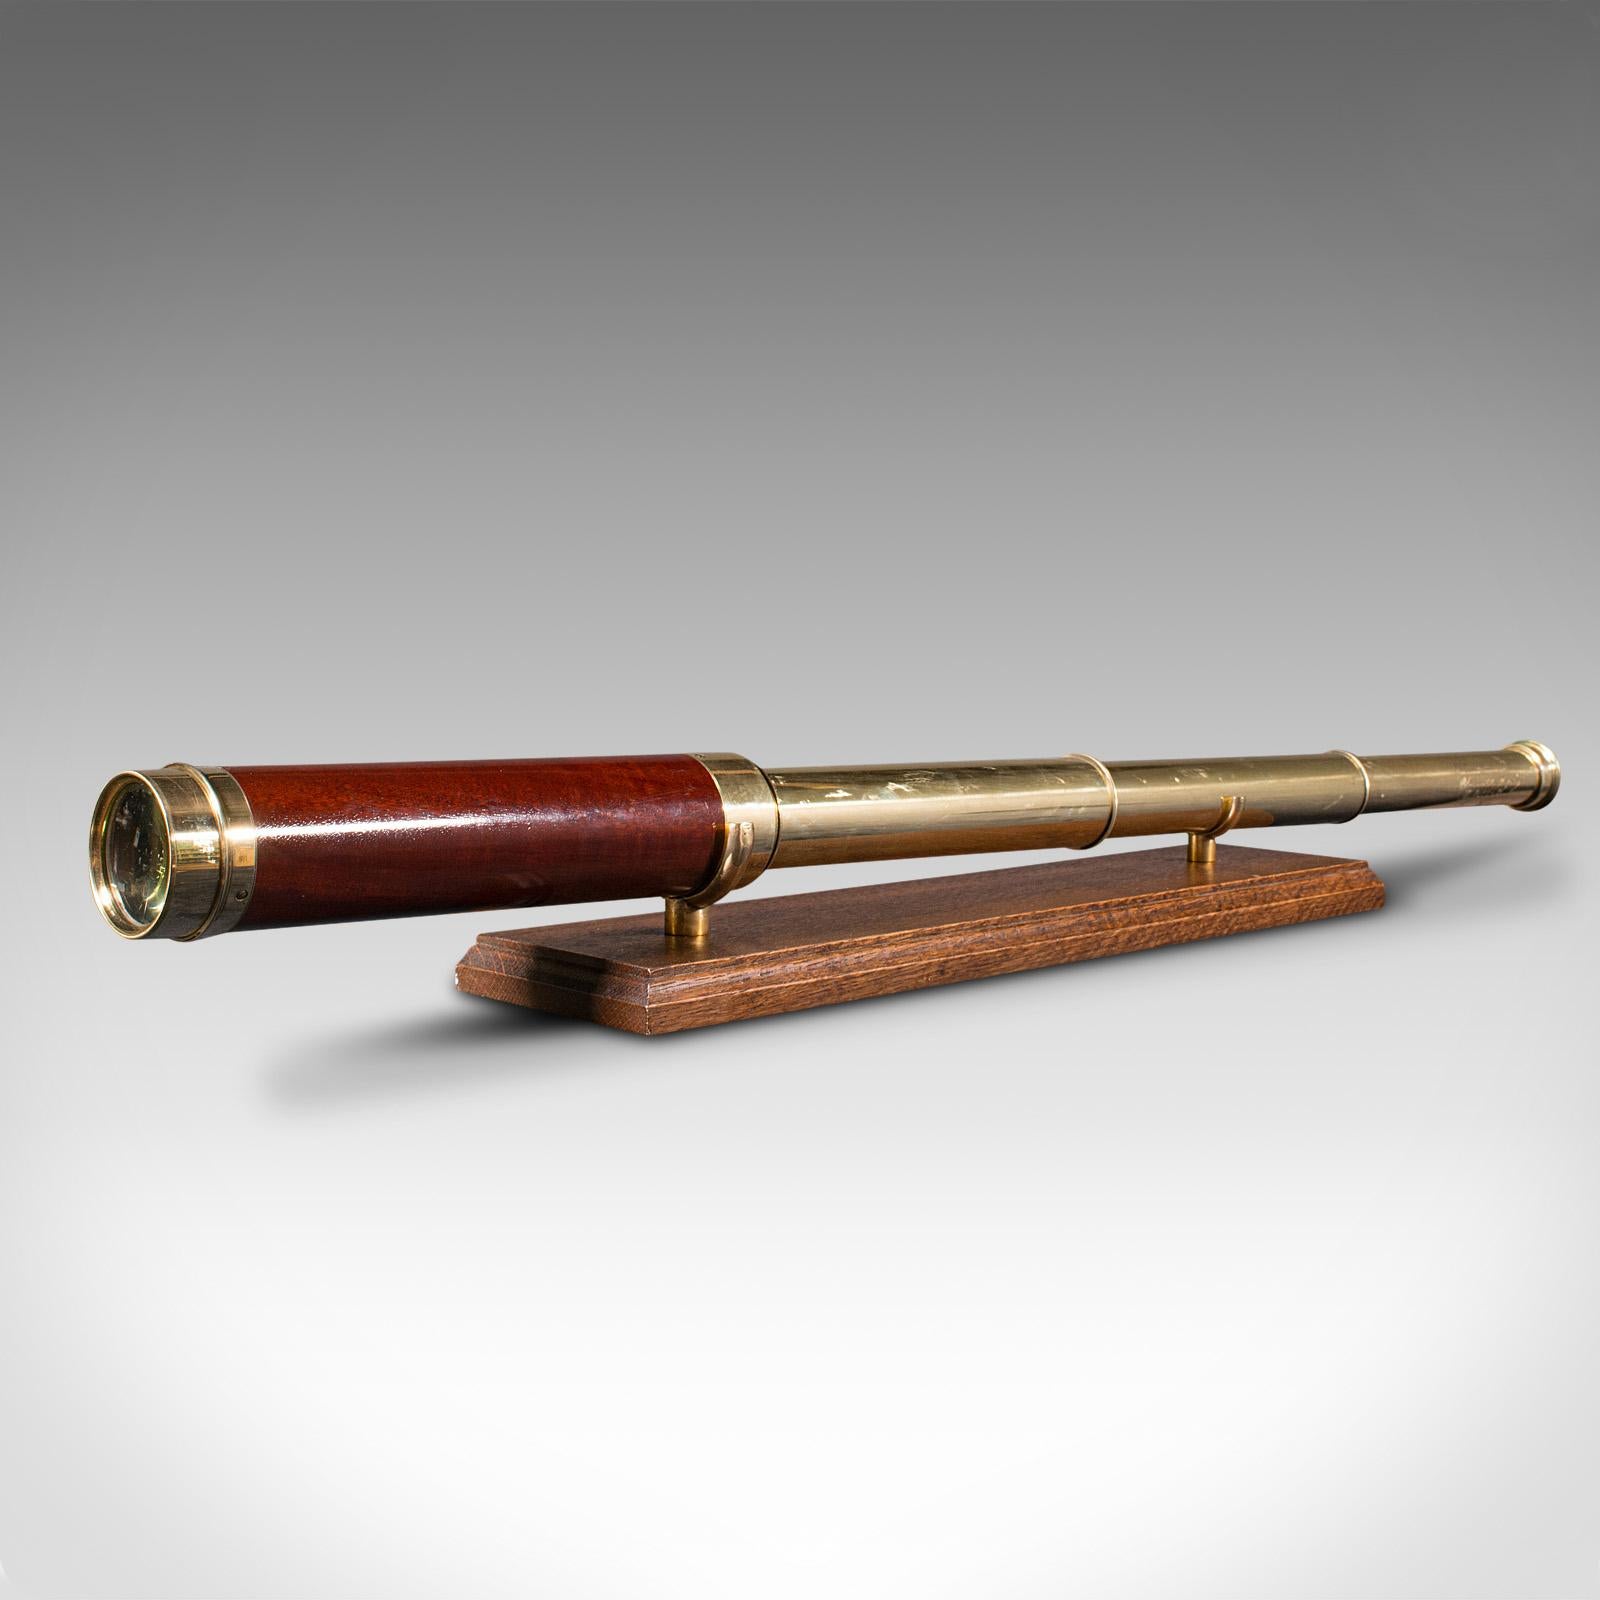 This is an antique 3-draw telescope. An English, terrestrial and astronomical refractor in leather case by JP Cutts, Sutton & Son, dating to the Victorian period, circa 1870.

Perfect for bird watching, landscape appreciation, wildlife, or